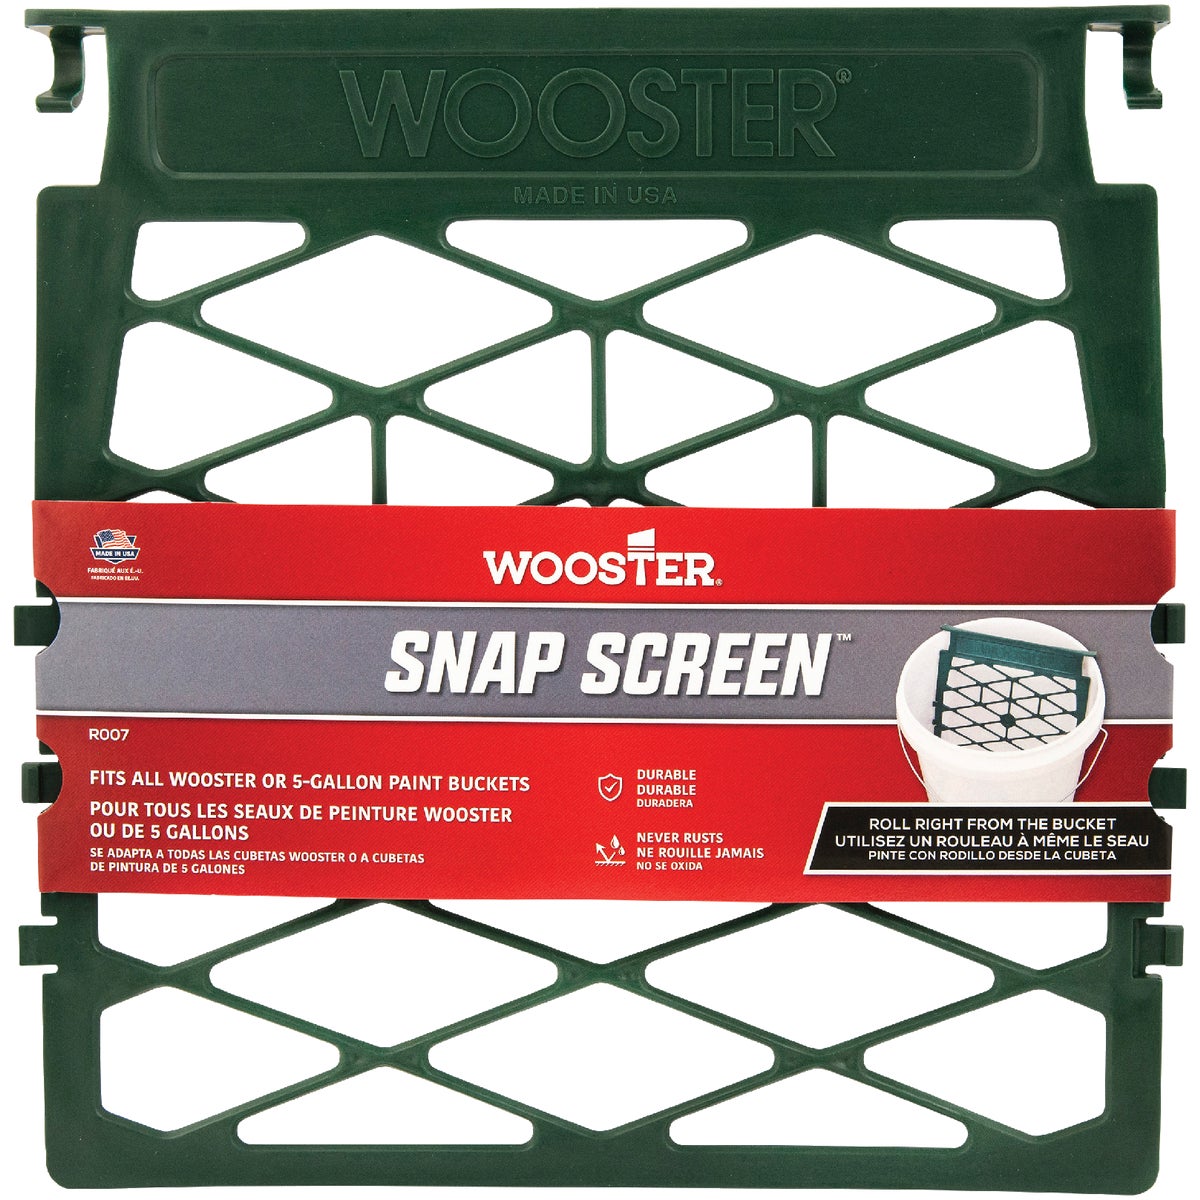 Wooster Snap Screen Paint Roller Grid